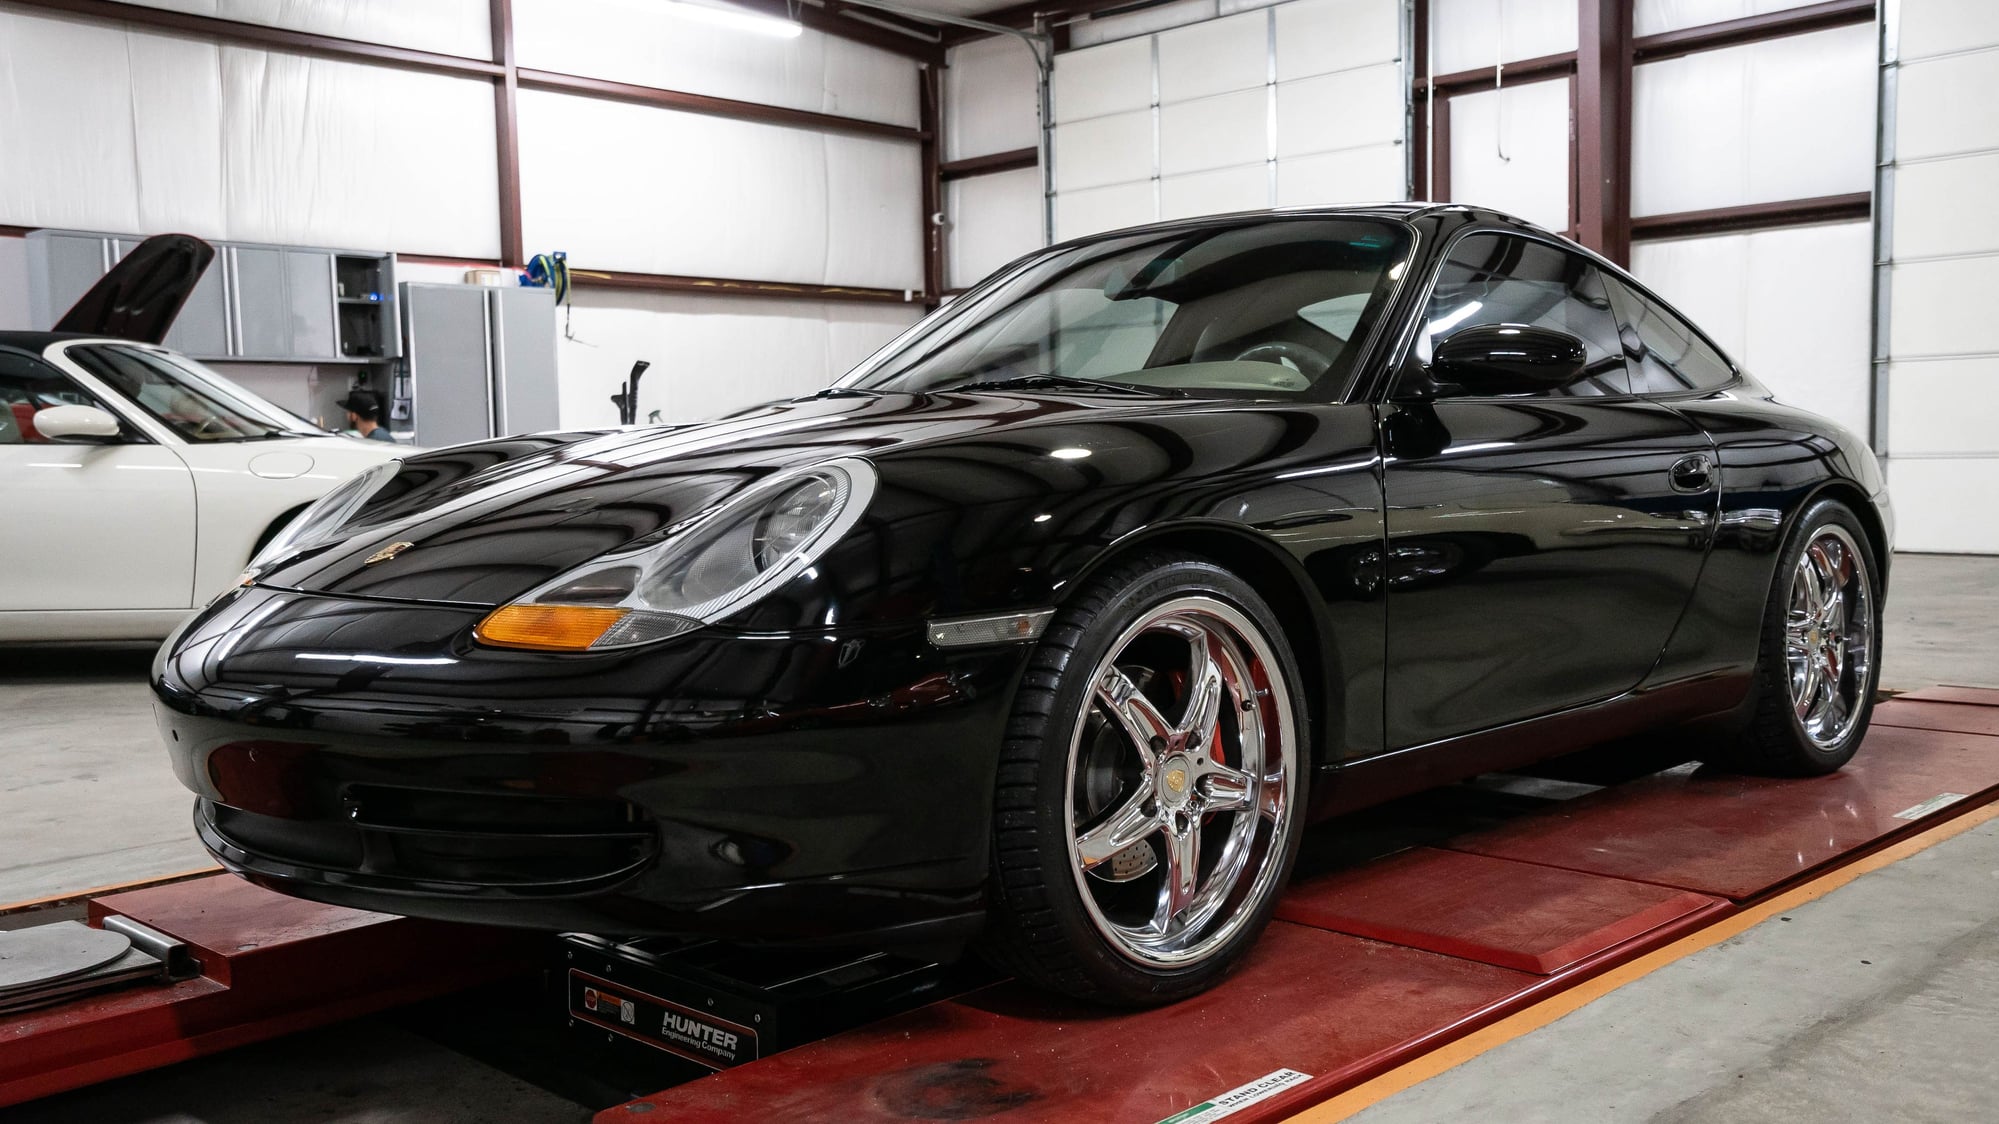 1999 Porsche 911 - 1999 Porsche 911 Carrera * LOW MILEAGE 4- OWNER CAR!! * - Used - VIN WP0AA2998XS623167 - 47,380 Miles - 6 cyl - 2WD - Manual - Coupe - Black - Mocksville, NC 27028, United States